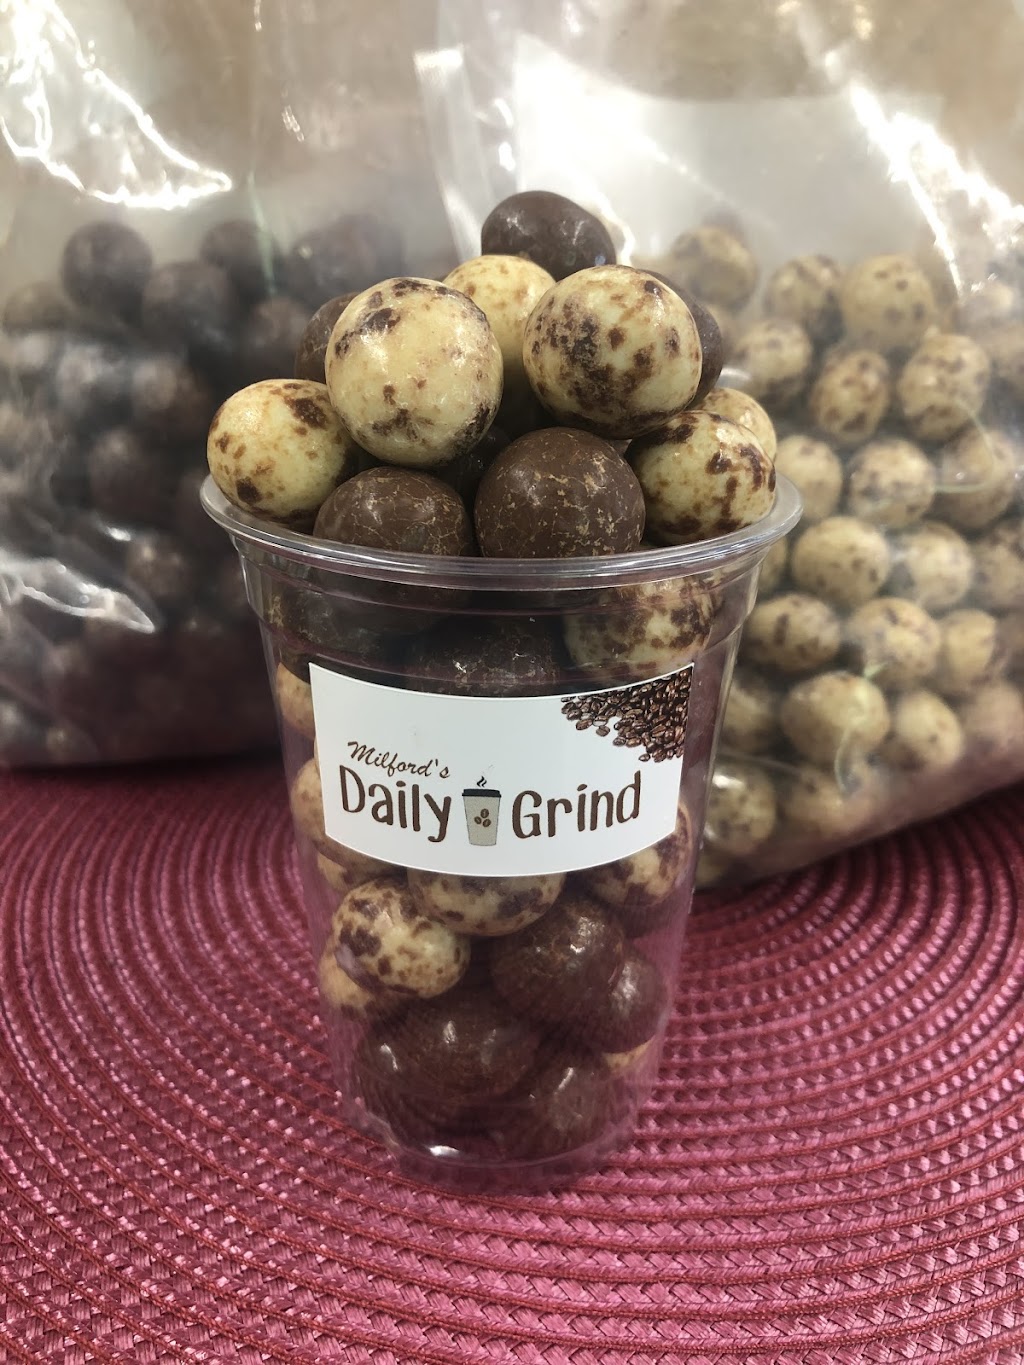 Milfords Daily Grind | 115 Seventh St, Milford, PA 18337 | Phone: (570) 409-3399